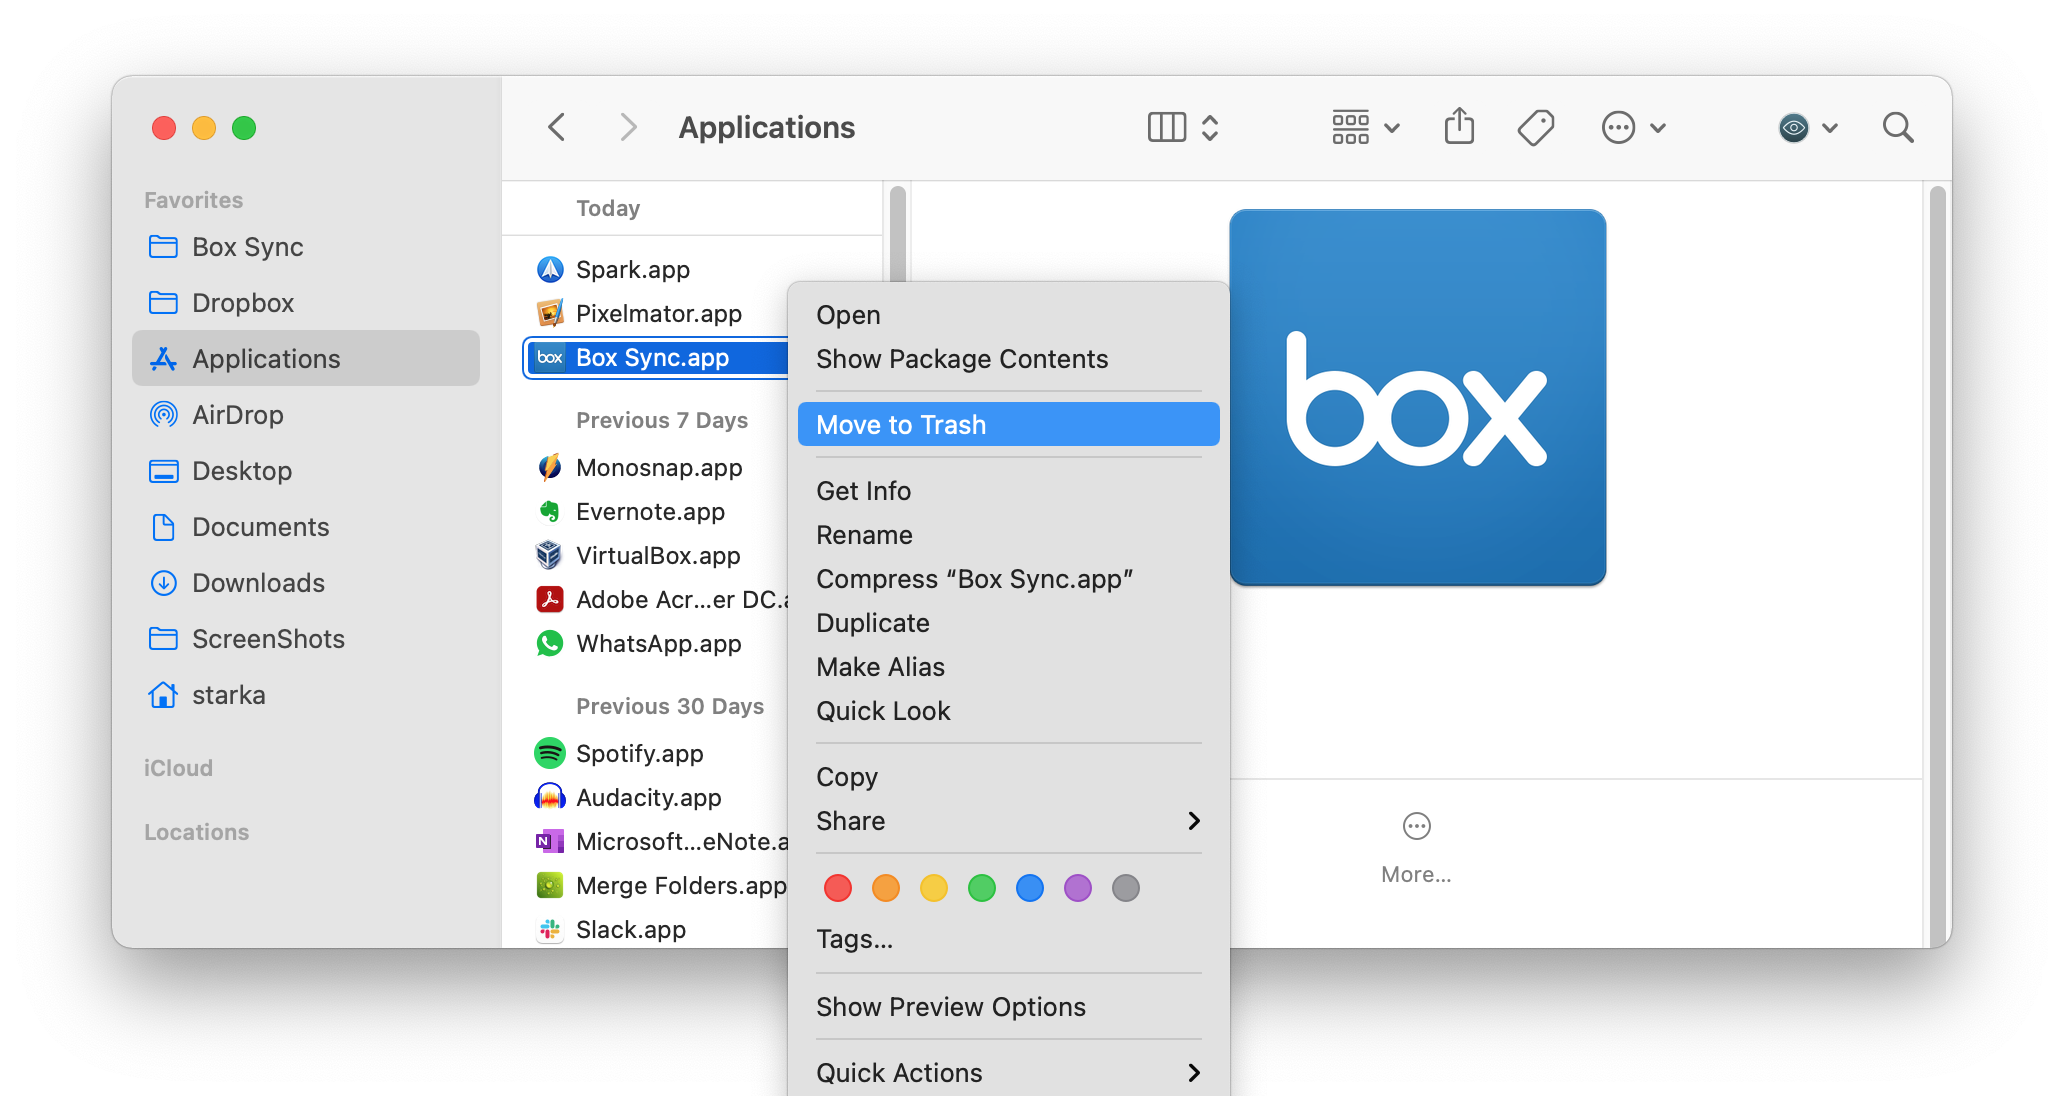 Removing Box Sync from the Applications folder